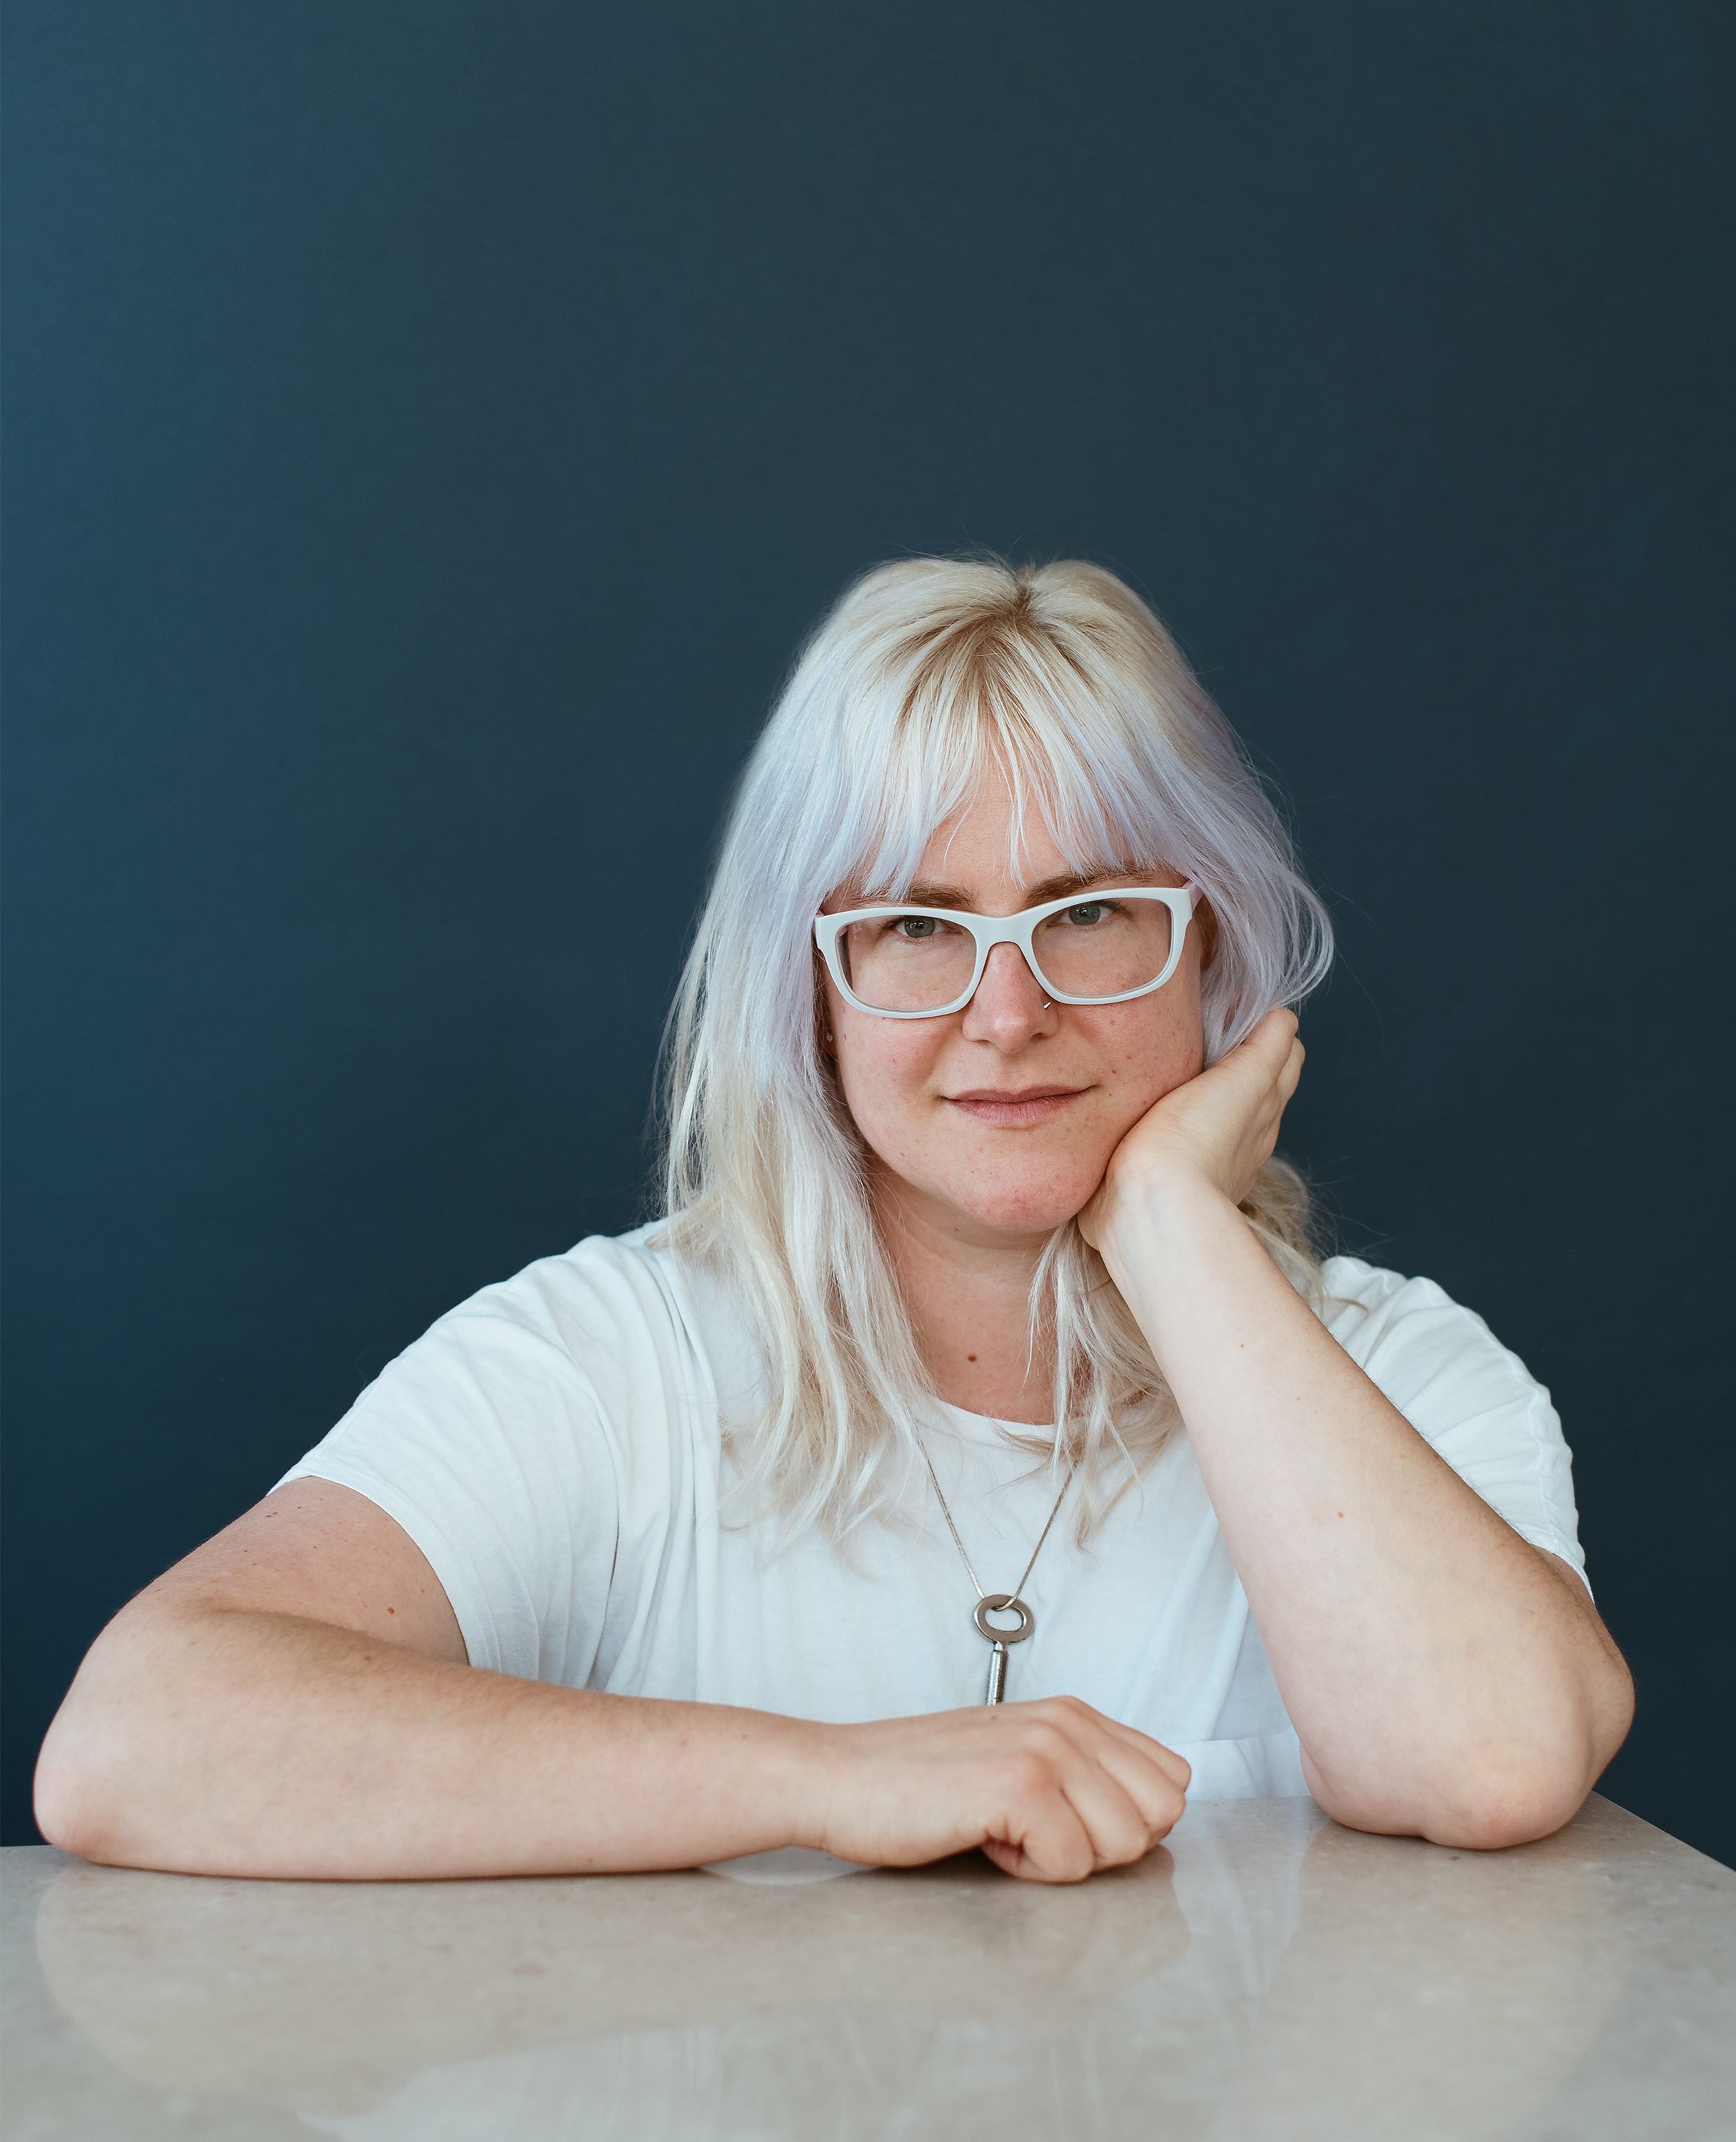  Elise, a white woman with purply-blonde hair and white glasses, looks straight at the camera. She is leaning on one hand, sitting at a marble countertop.  